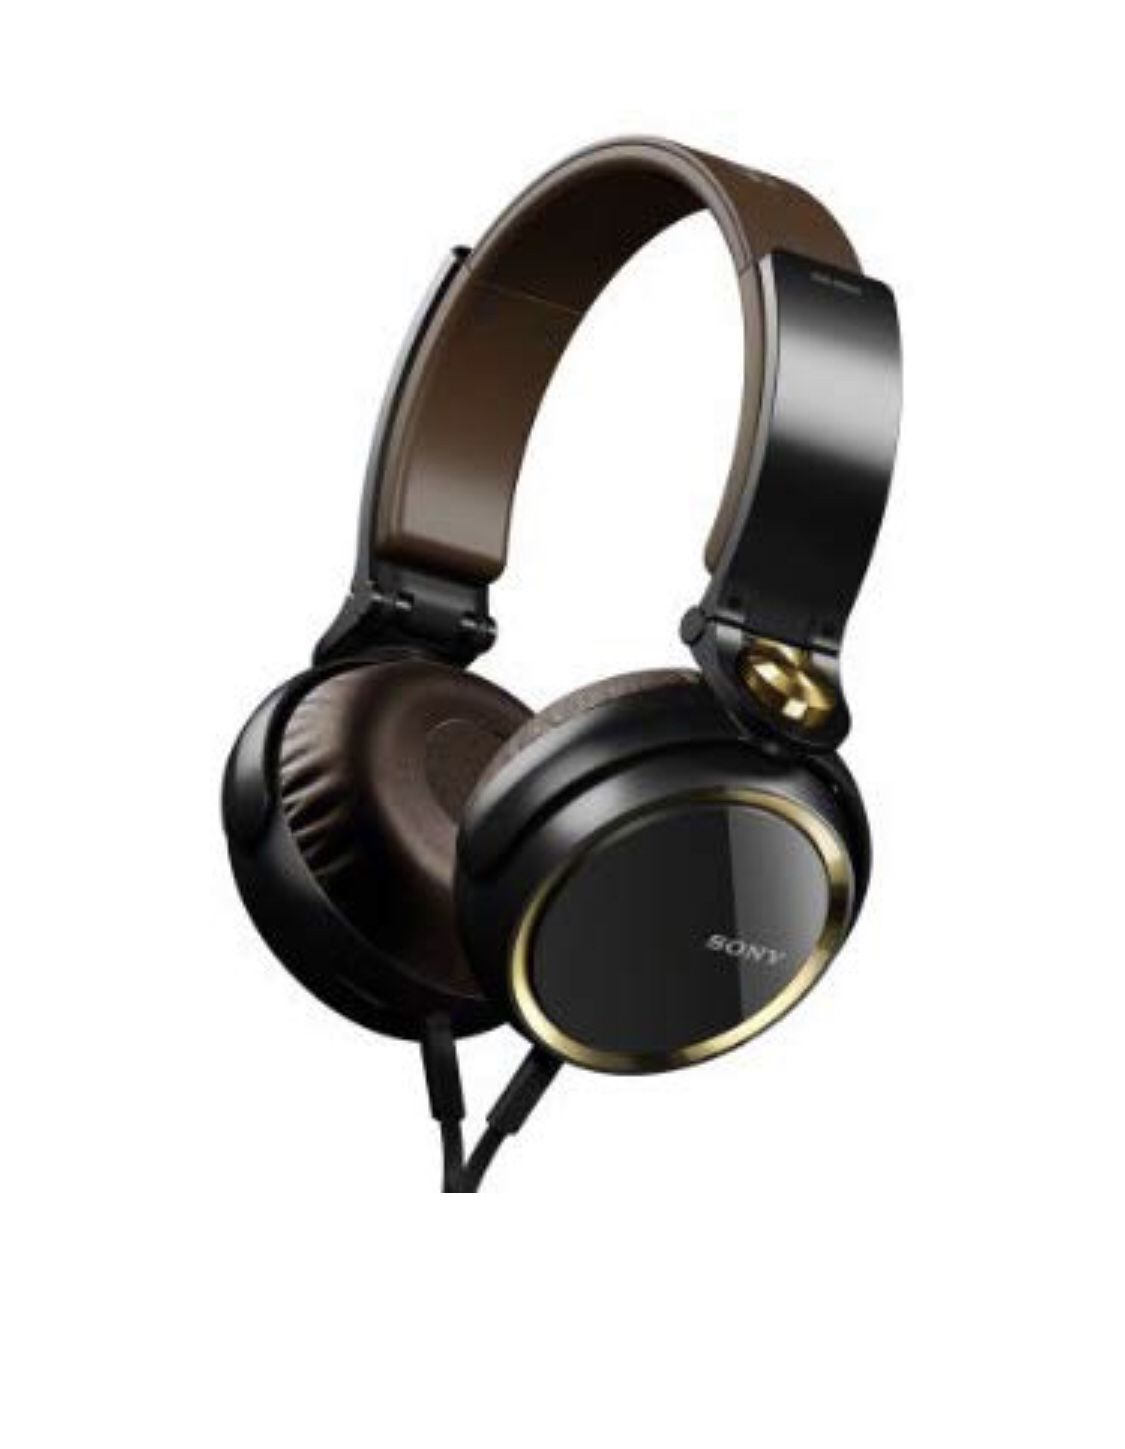 Sony MDR-XB600 Headphone, Excellent